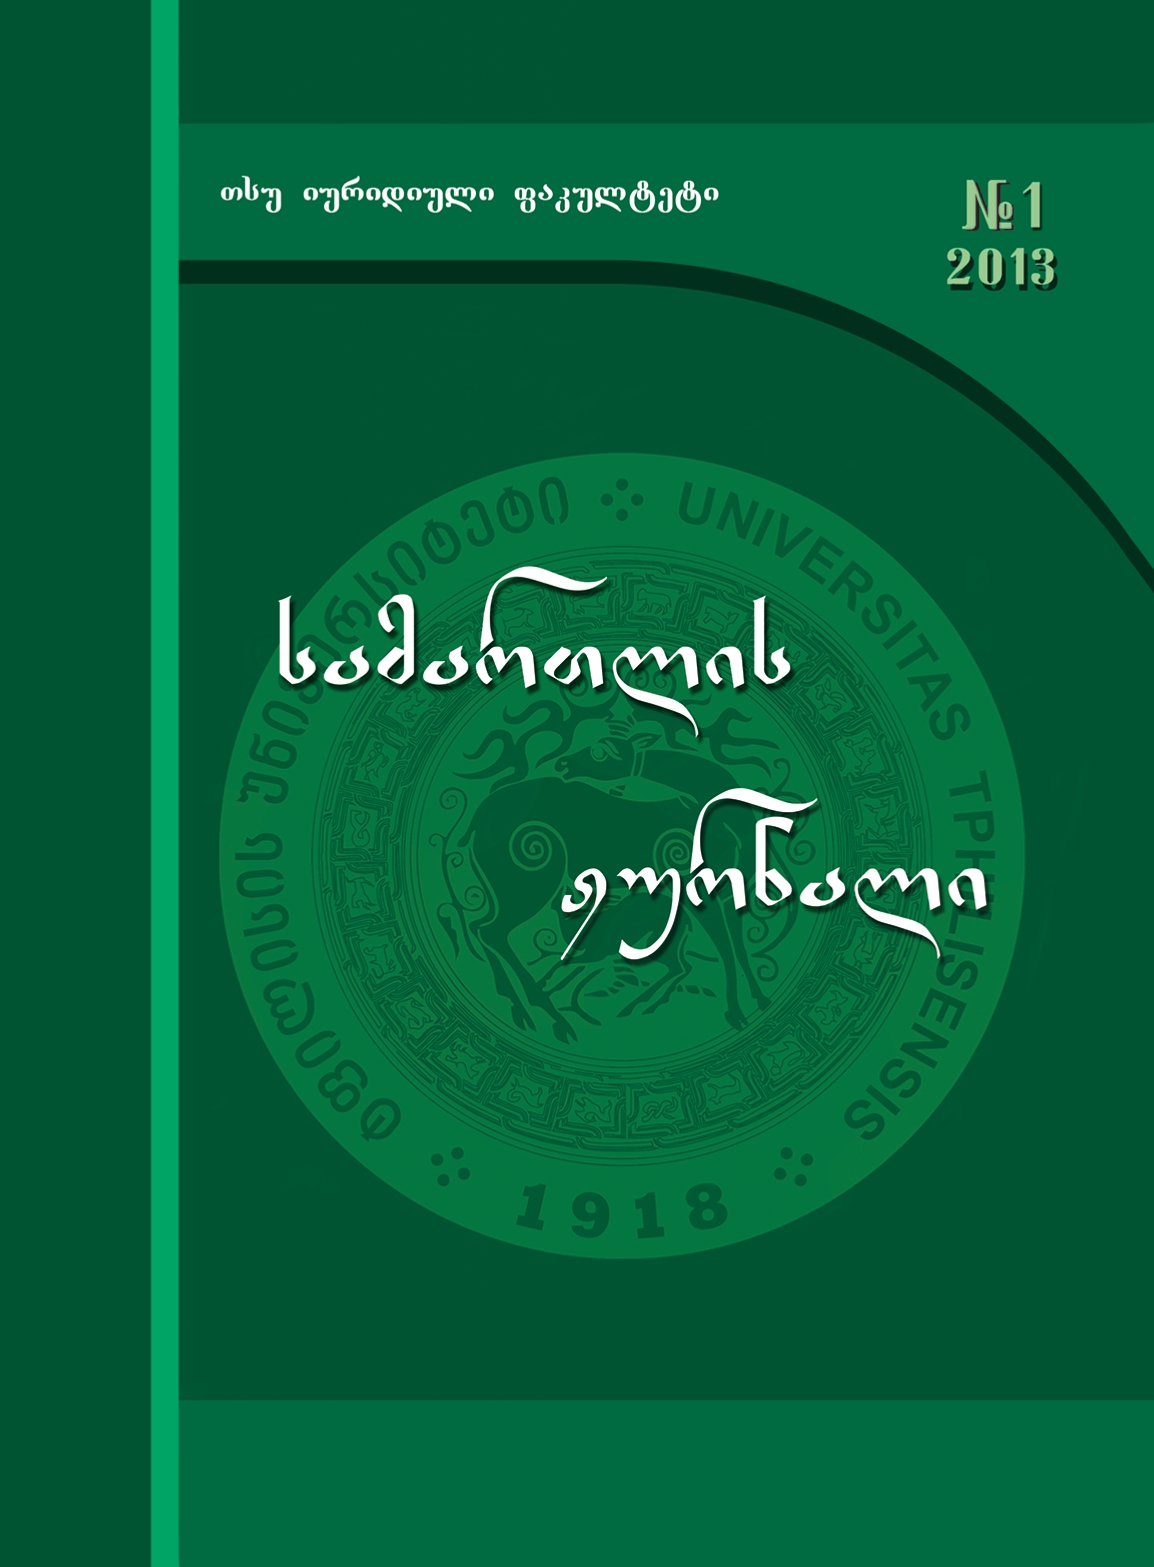 					View No. 1 (2013):  Journal of Law
				